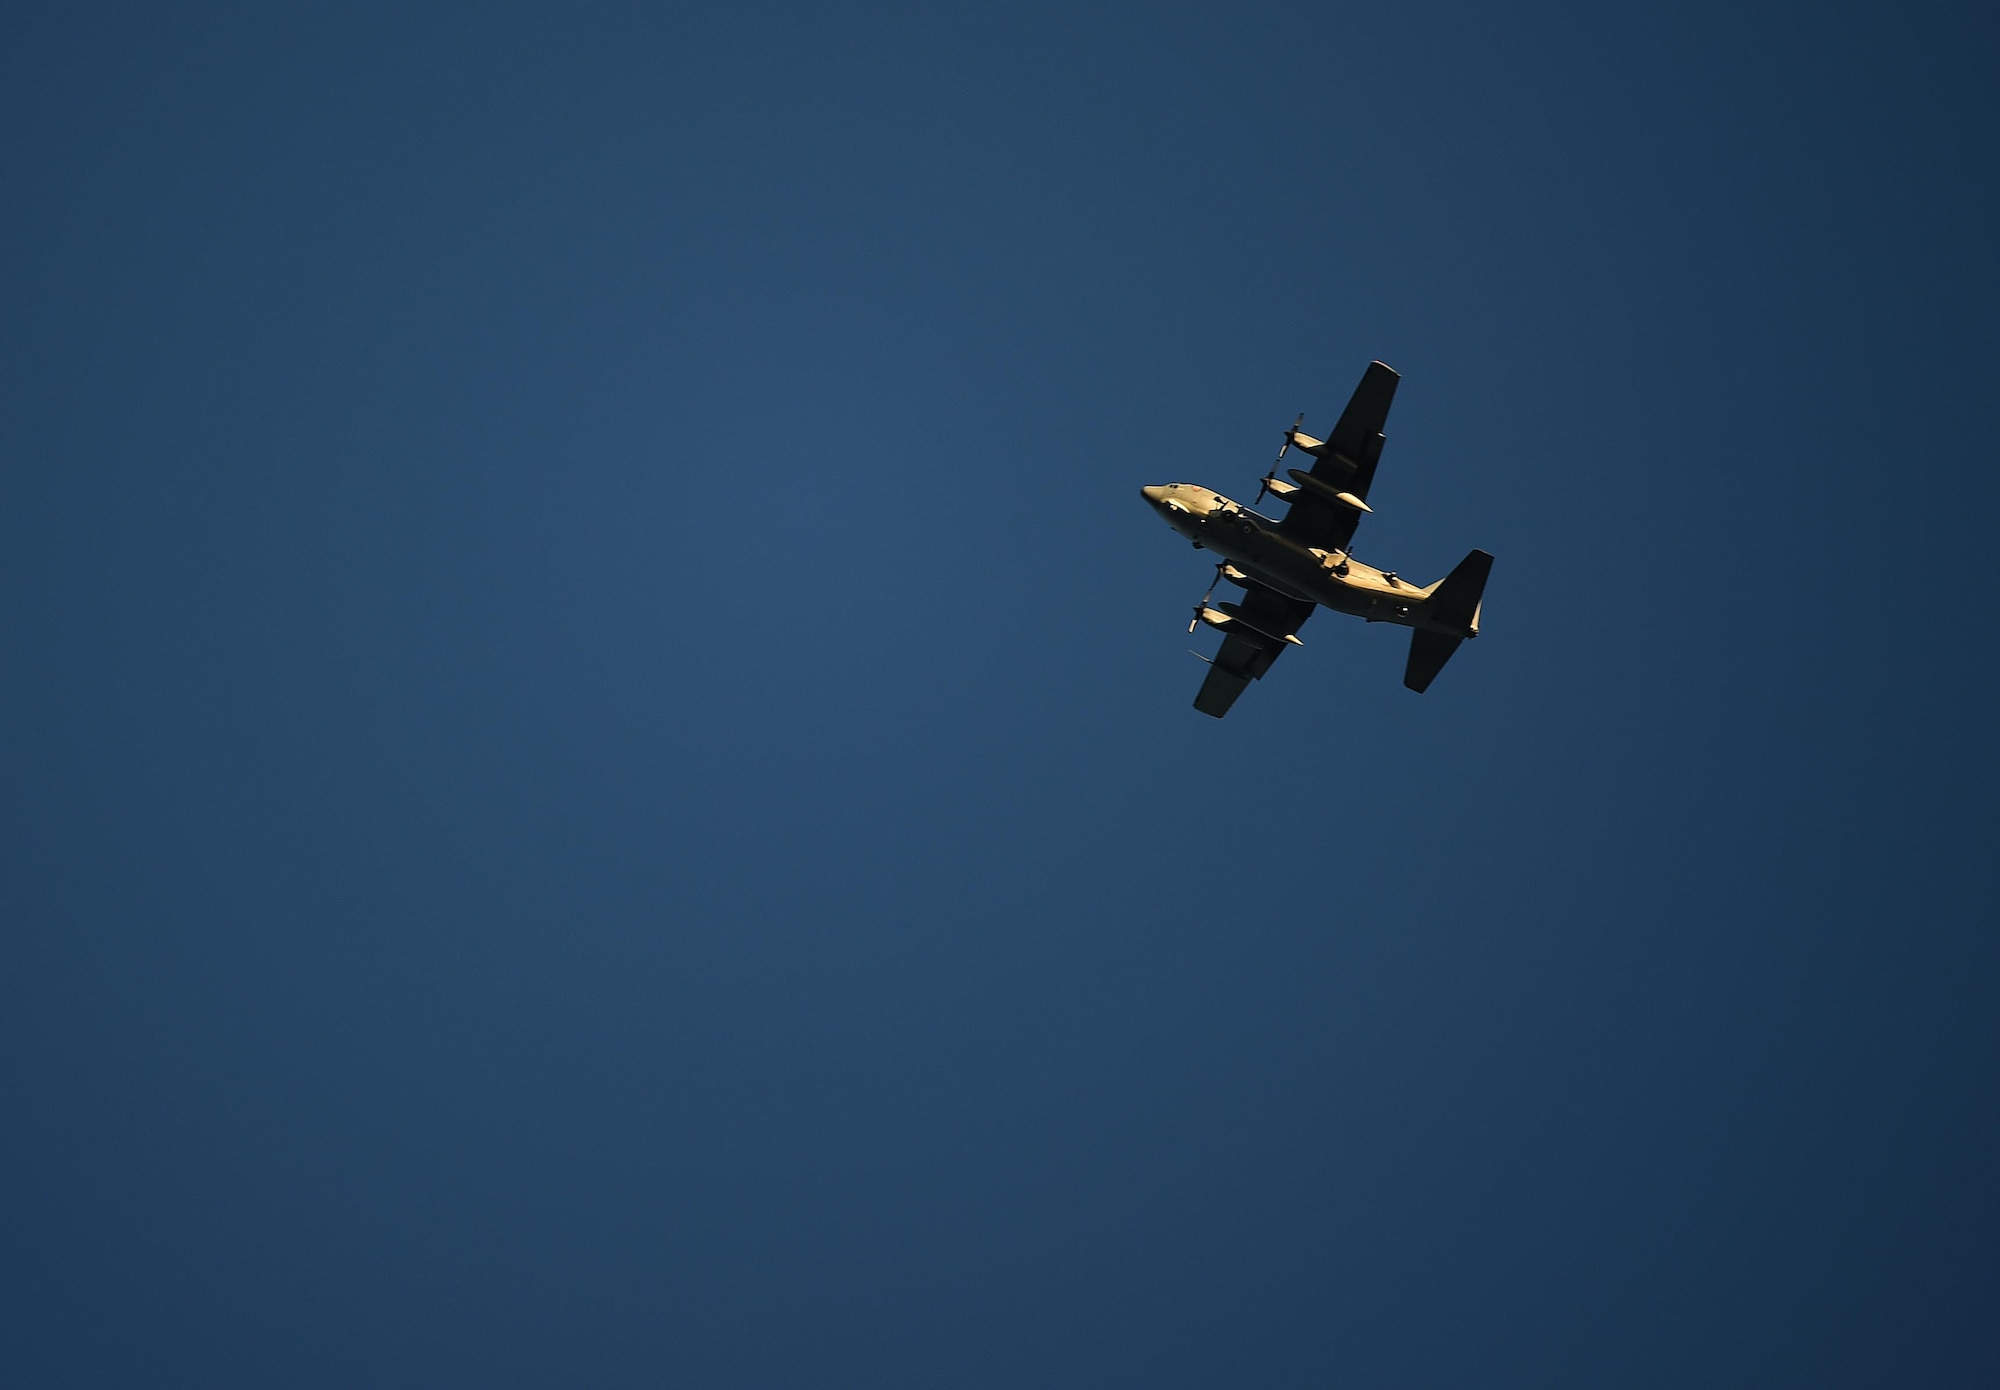 A 4th Special Operations Squadron AC-130U “Spooky” gunship orbits a target during live-fire training, June 16, 2015, at Eglin Range, Fla. Aircrew members communicated closely with ground-range operators to ensure the gunship's rounds hit simulated enemy targets. (U.S. Air Force photo by Airman 1st Class Ryan Conroy/Released)